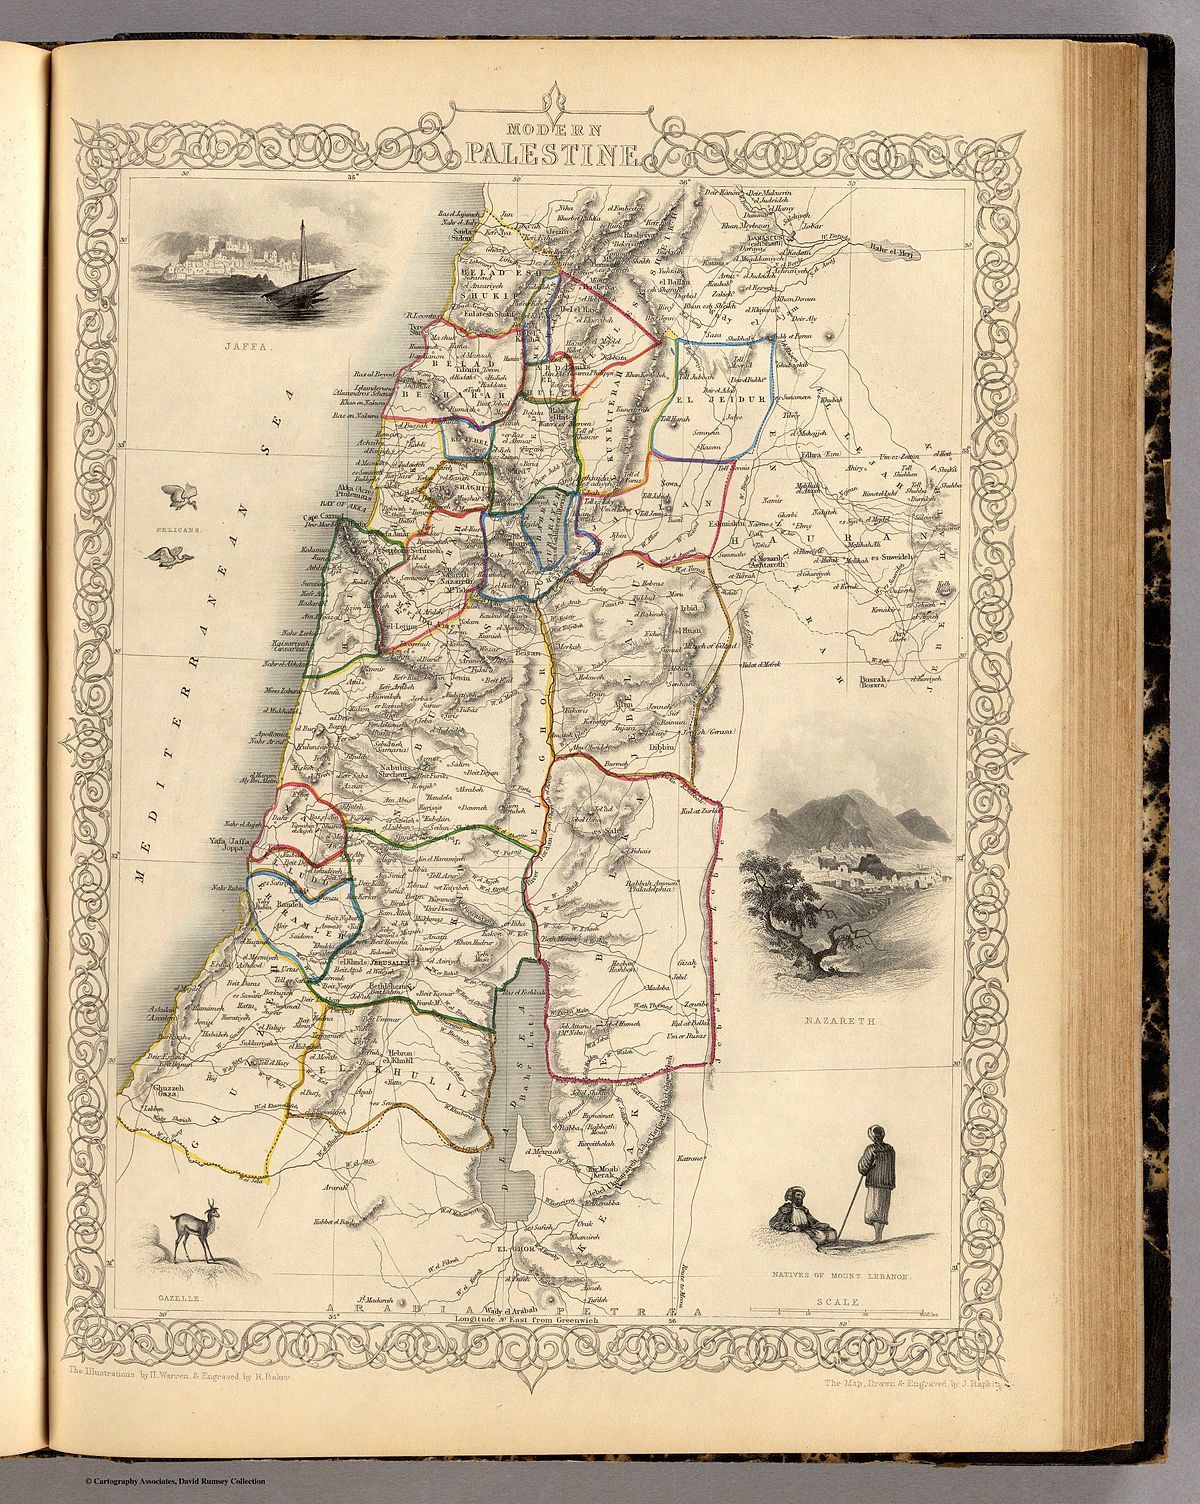 The Untold Stories of 19th Century Palestine: A Journey through History